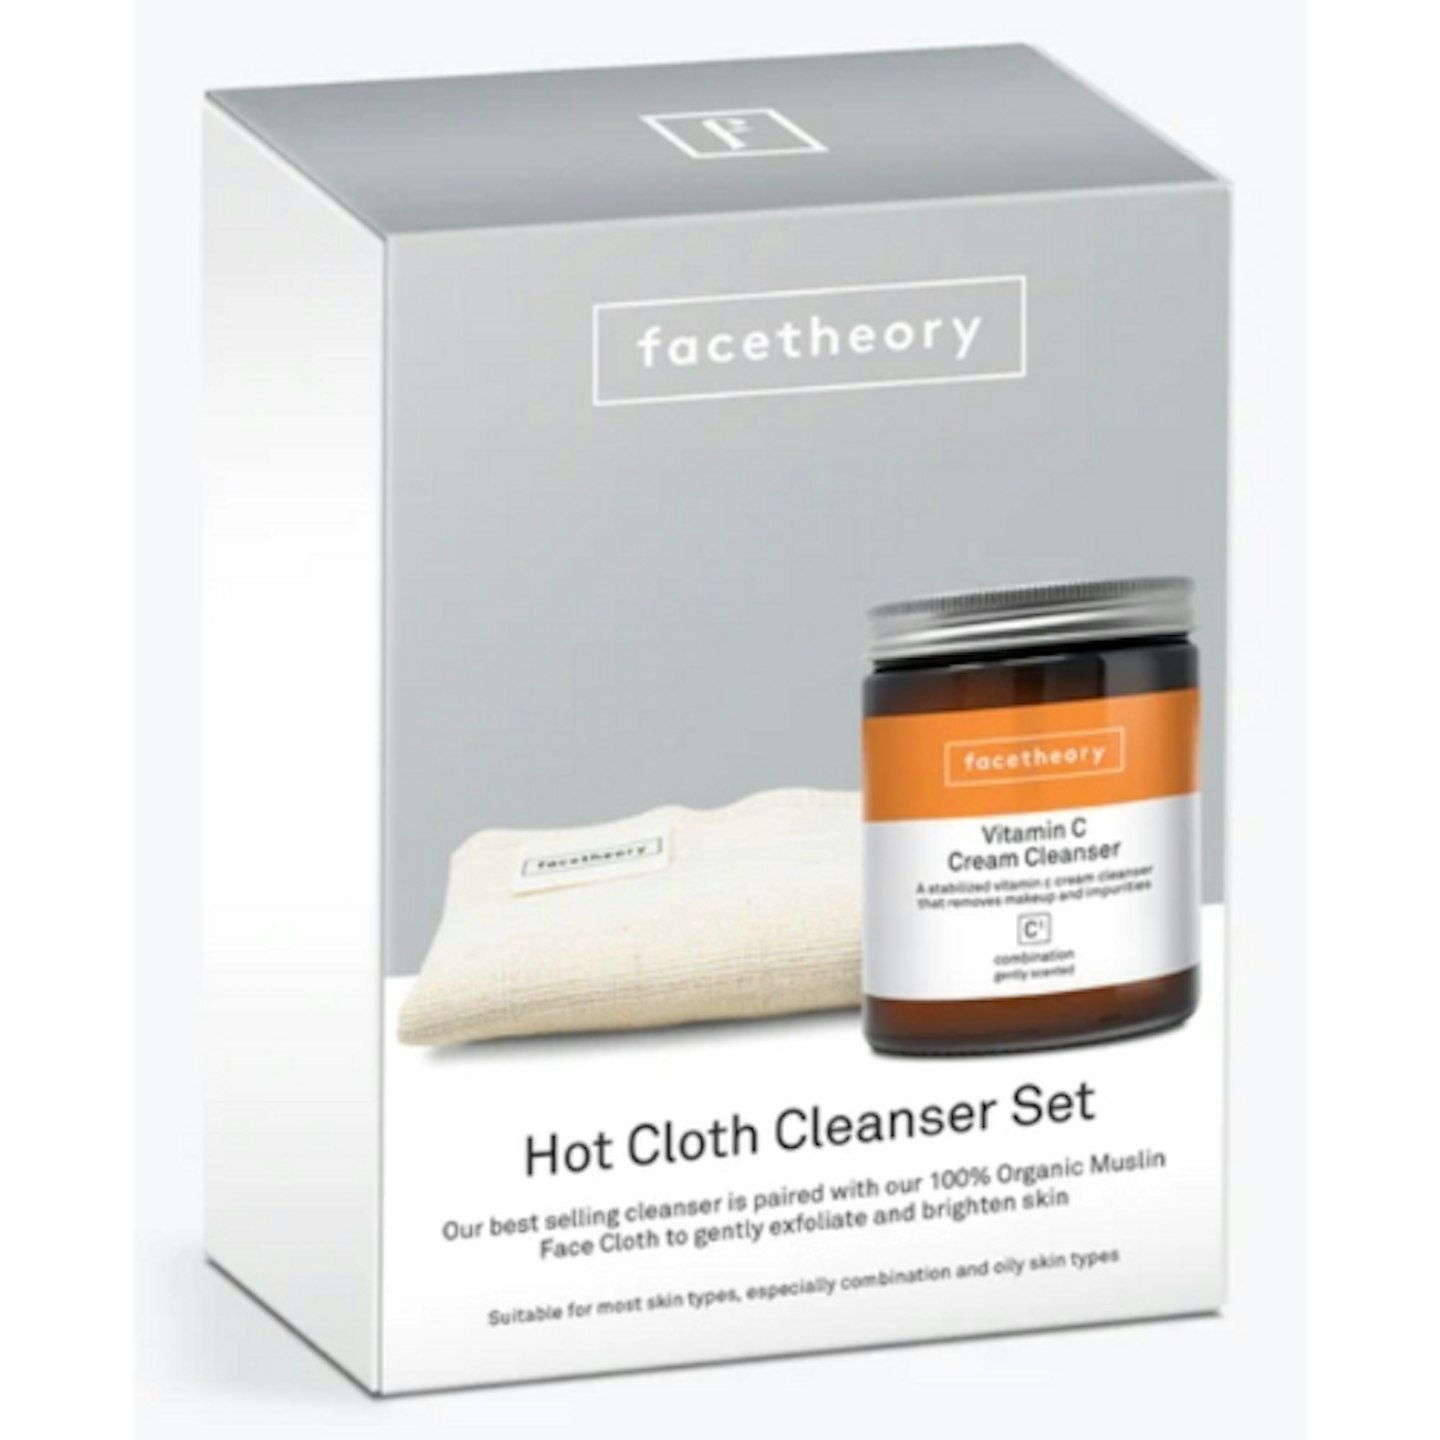 Facetheory Hot Cloth Cleanser Set 170ml